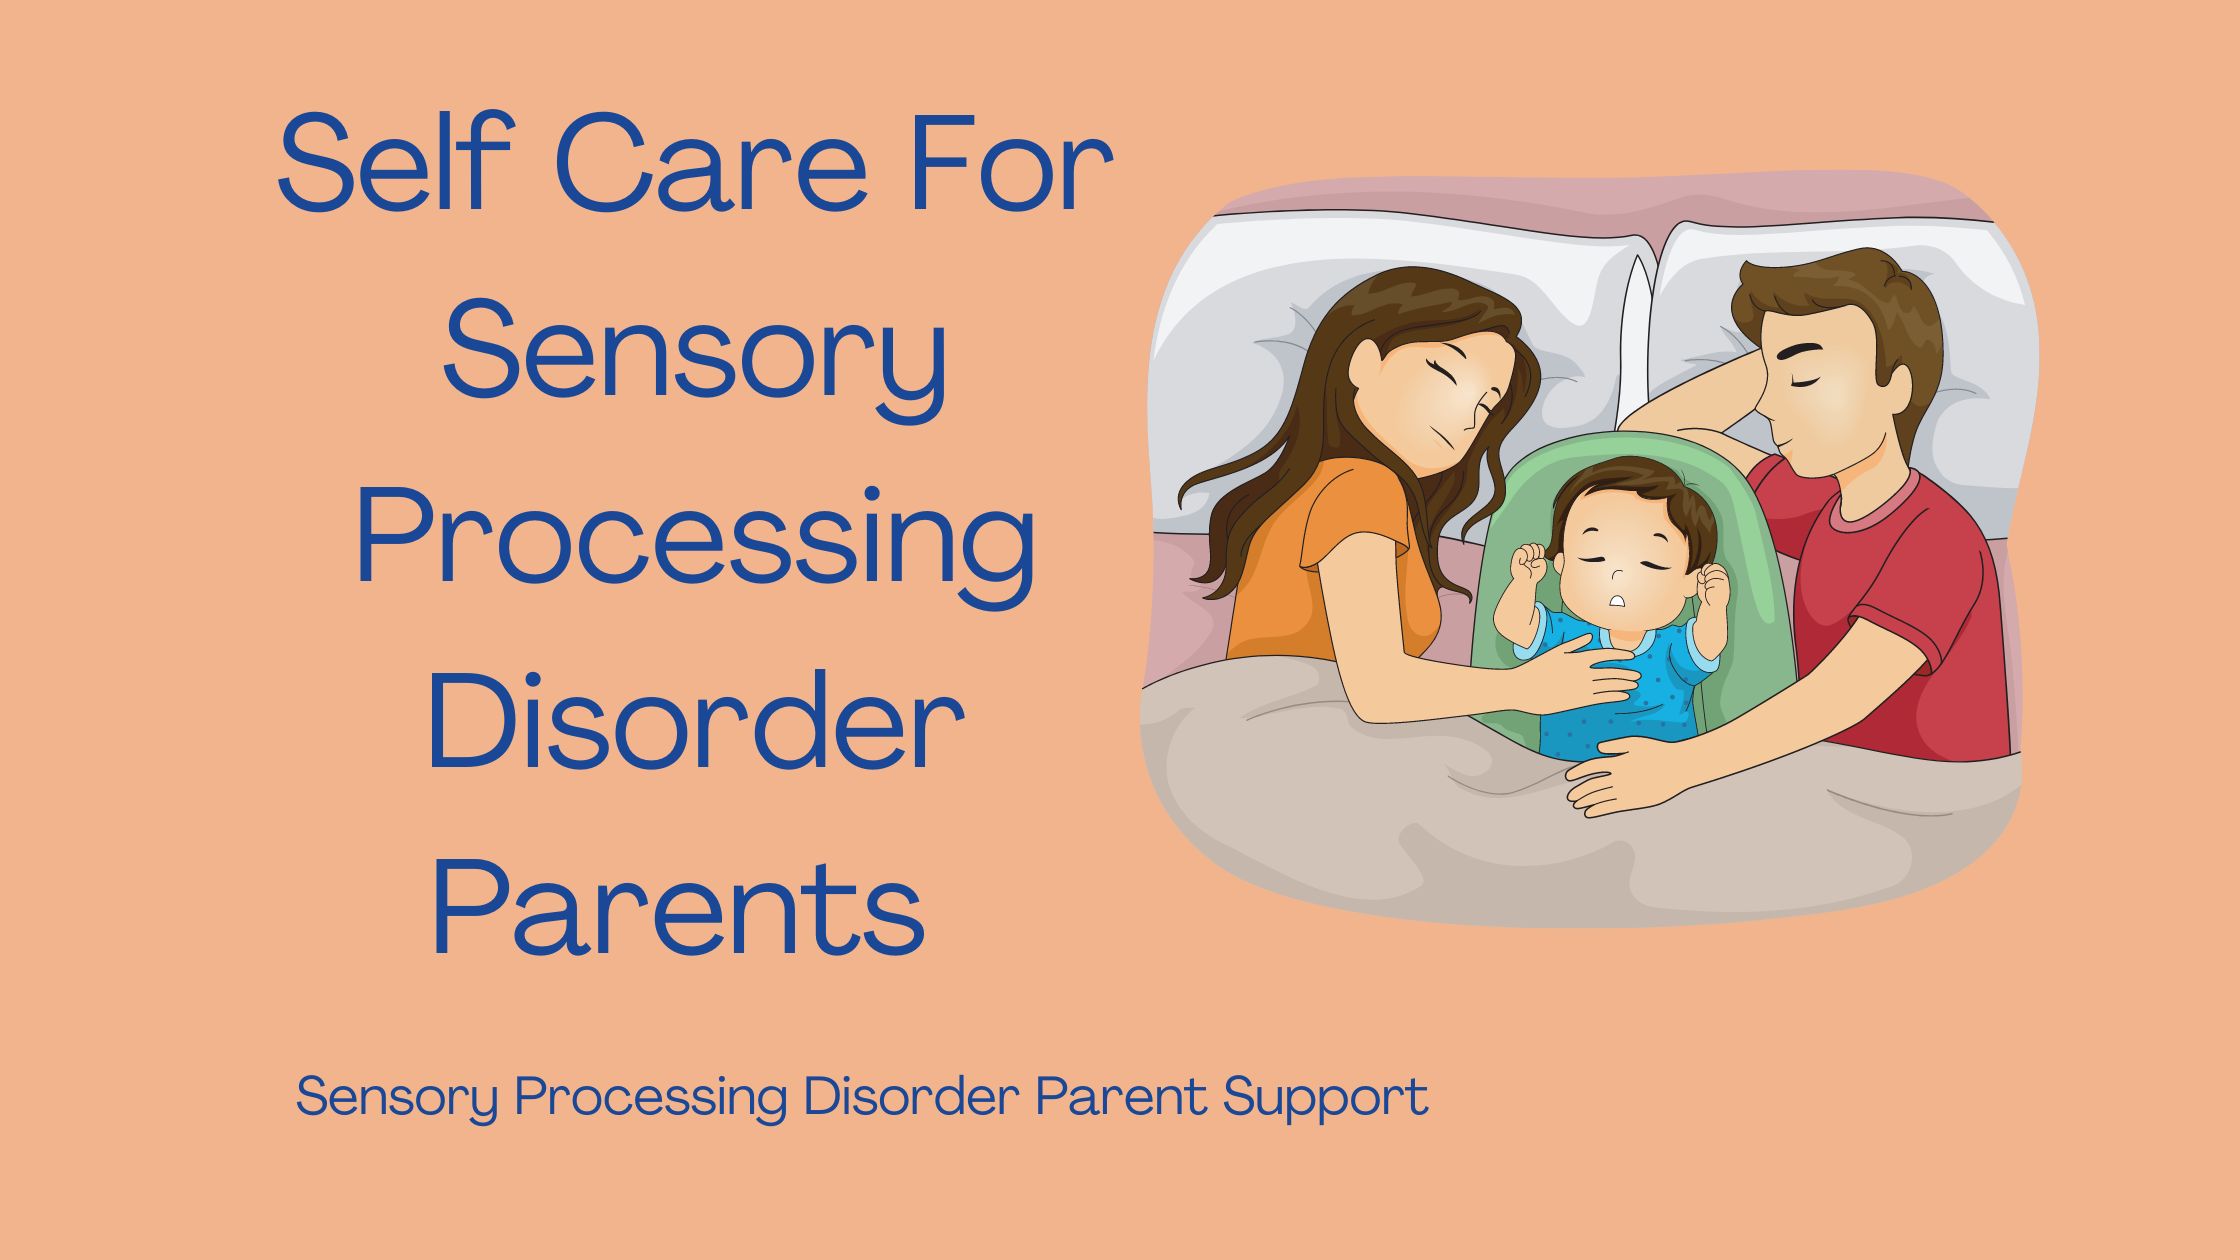 parent in bed sleeping with child getting rest and self care Self Care For Sensory Processing Disorder Parents